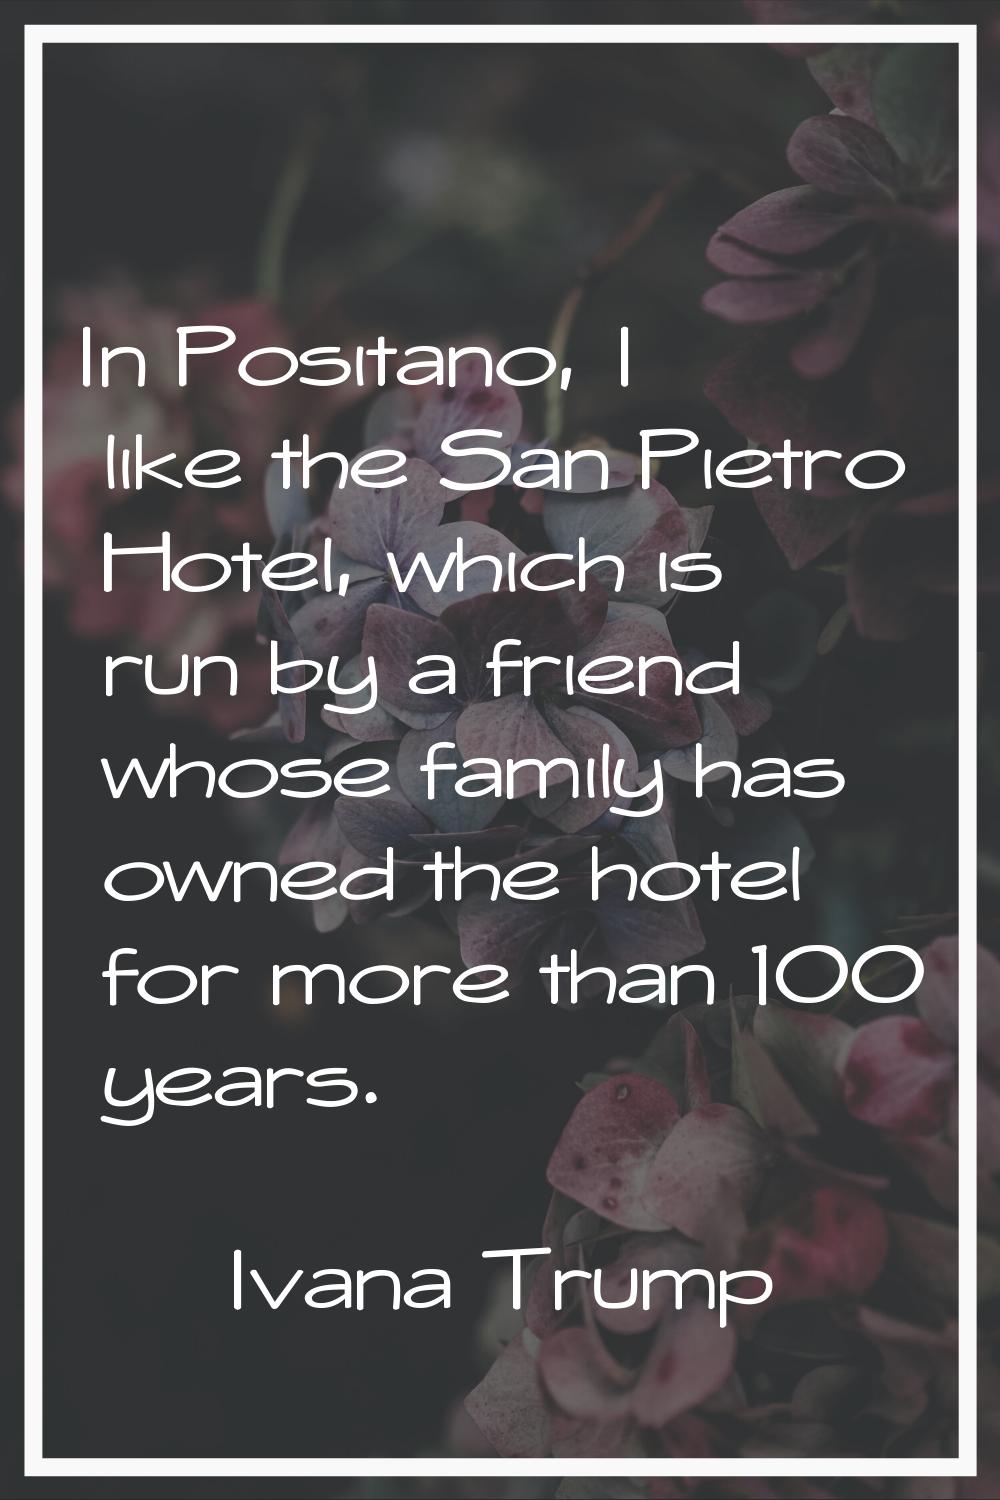 In Positano, I like the San Pietro Hotel, which is run by a friend whose family has owned the hotel